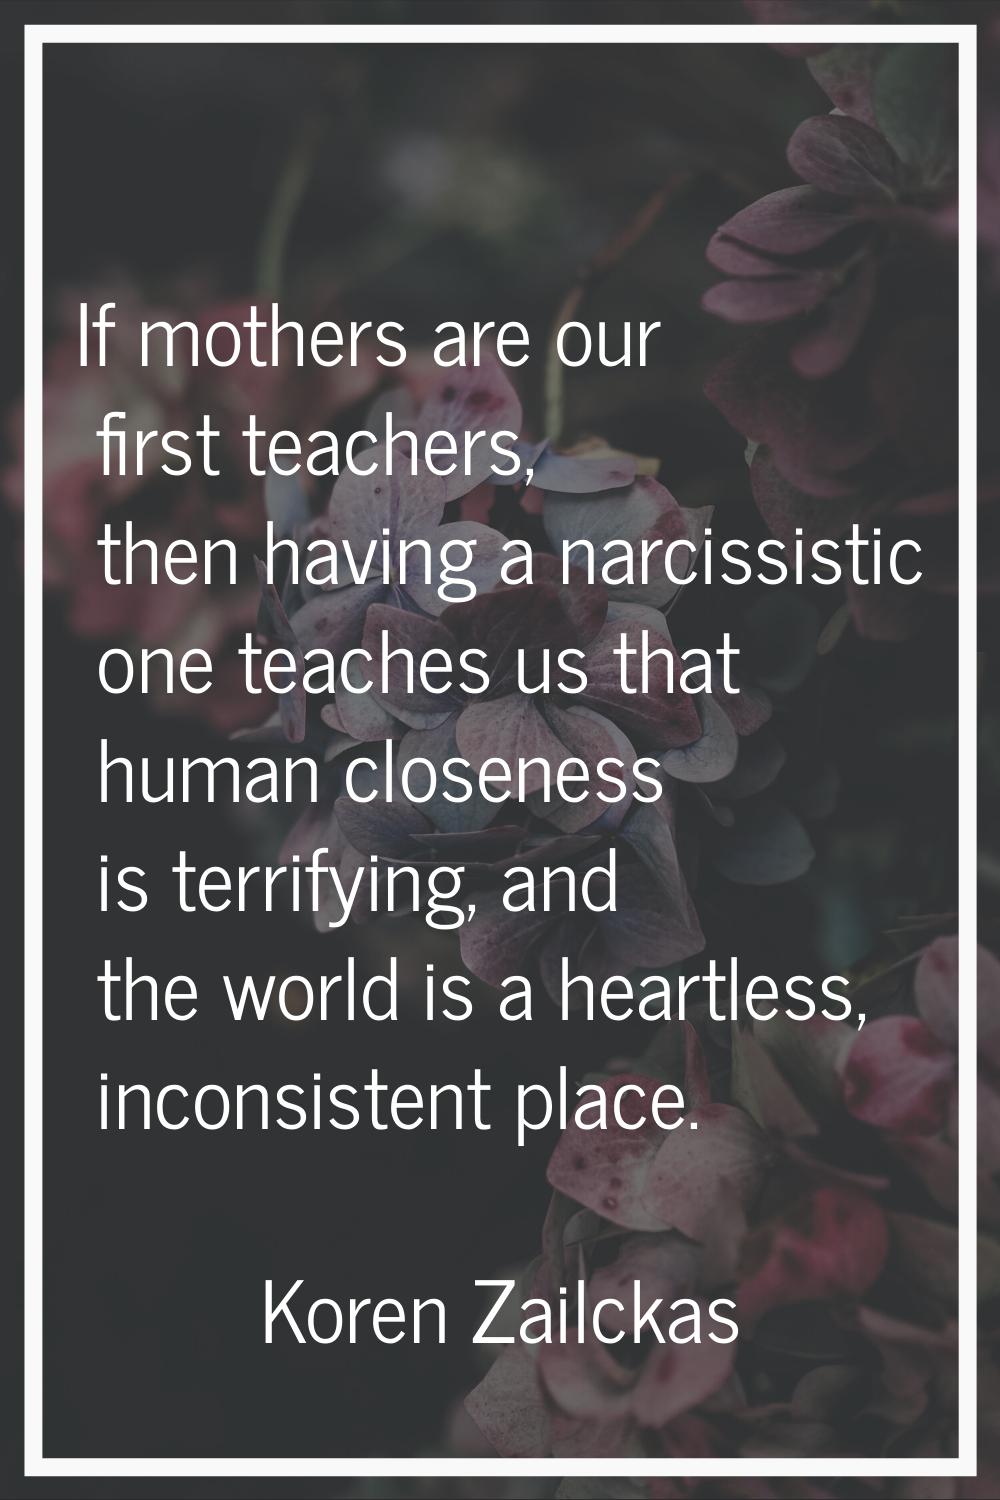 If mothers are our first teachers, then having a narcissistic one teaches us that human closeness i